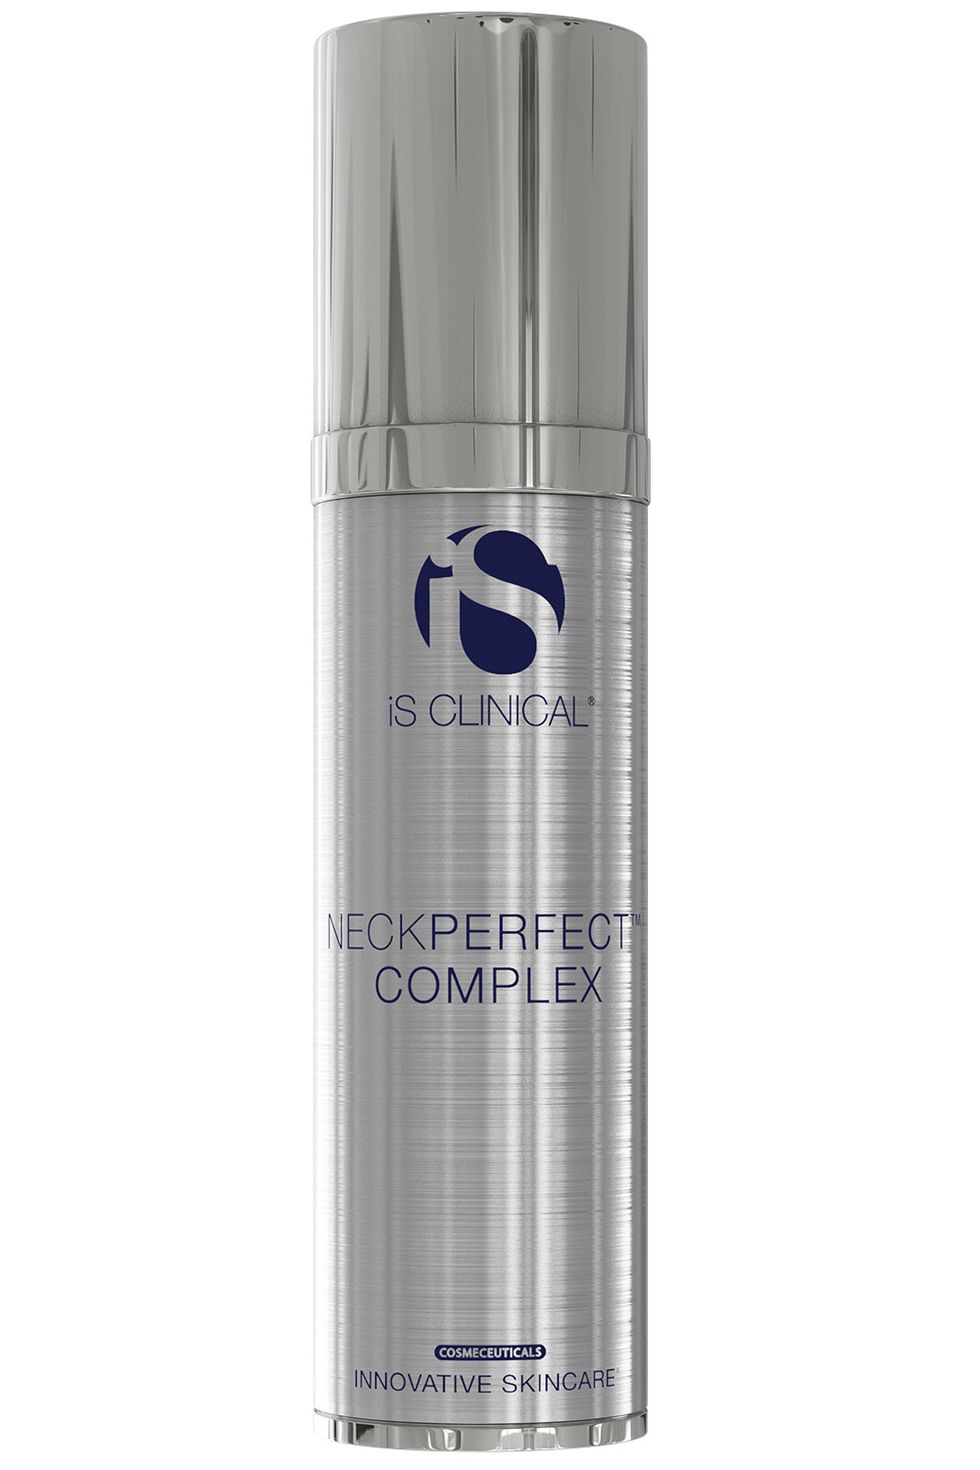 <p>Smooth on <a href="http://www.lovelyskin.com/o/is-clinical-neckperfect-complex" target="_blank" data-tracking-id="recirc-text-link">iS Clinical&nbsp;Neckperfect Complex</a>&nbsp;($78) twice a day. A targeted&nbsp;anti-aging treatment, it's&nbsp;formulated to minimize the&nbsp;appearance of crepiness,&nbsp;uneven texture, and sagging.</p>